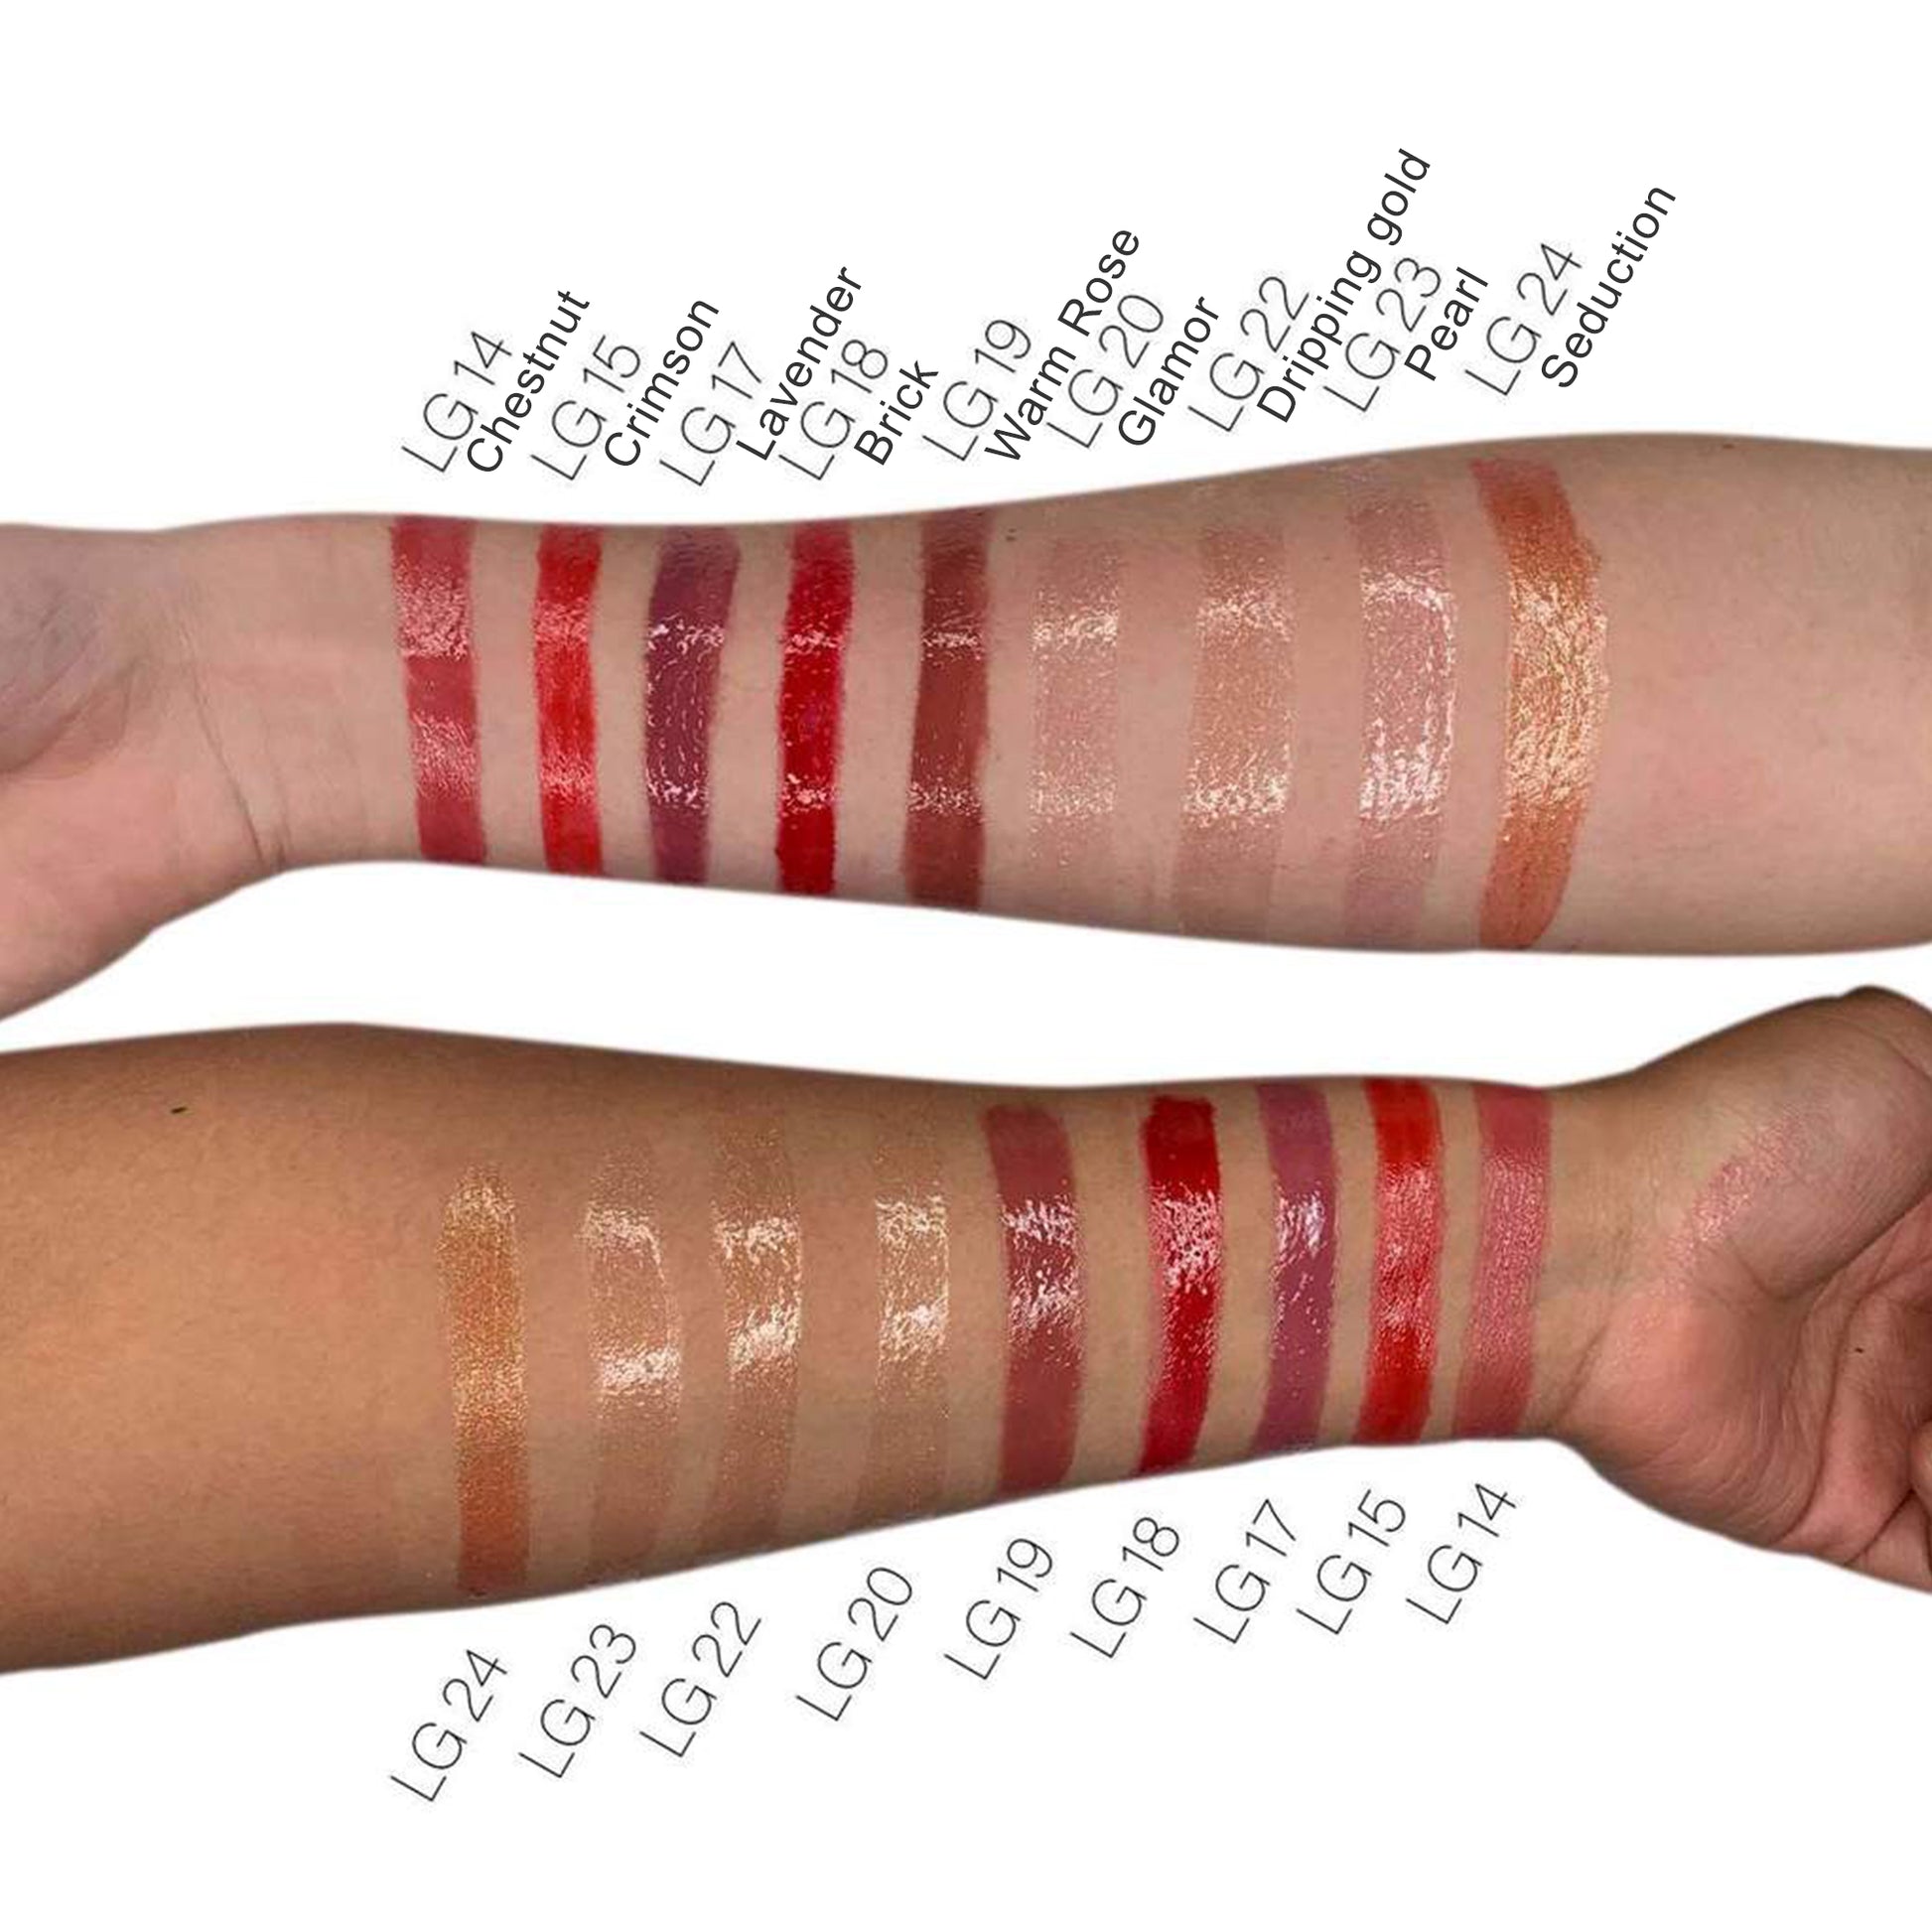 Chestnut Lip Gloss by Cruisin Organics. enduring brightness that spreads widely and exhibits a beautiful fall color of yellow. Lips will sparkle without drying thanks to the creamy white flesh of the chestnut fruit-infused lip gloss. Clean, ethical, vegan, and paraben-free beauty lines.  22 choices.